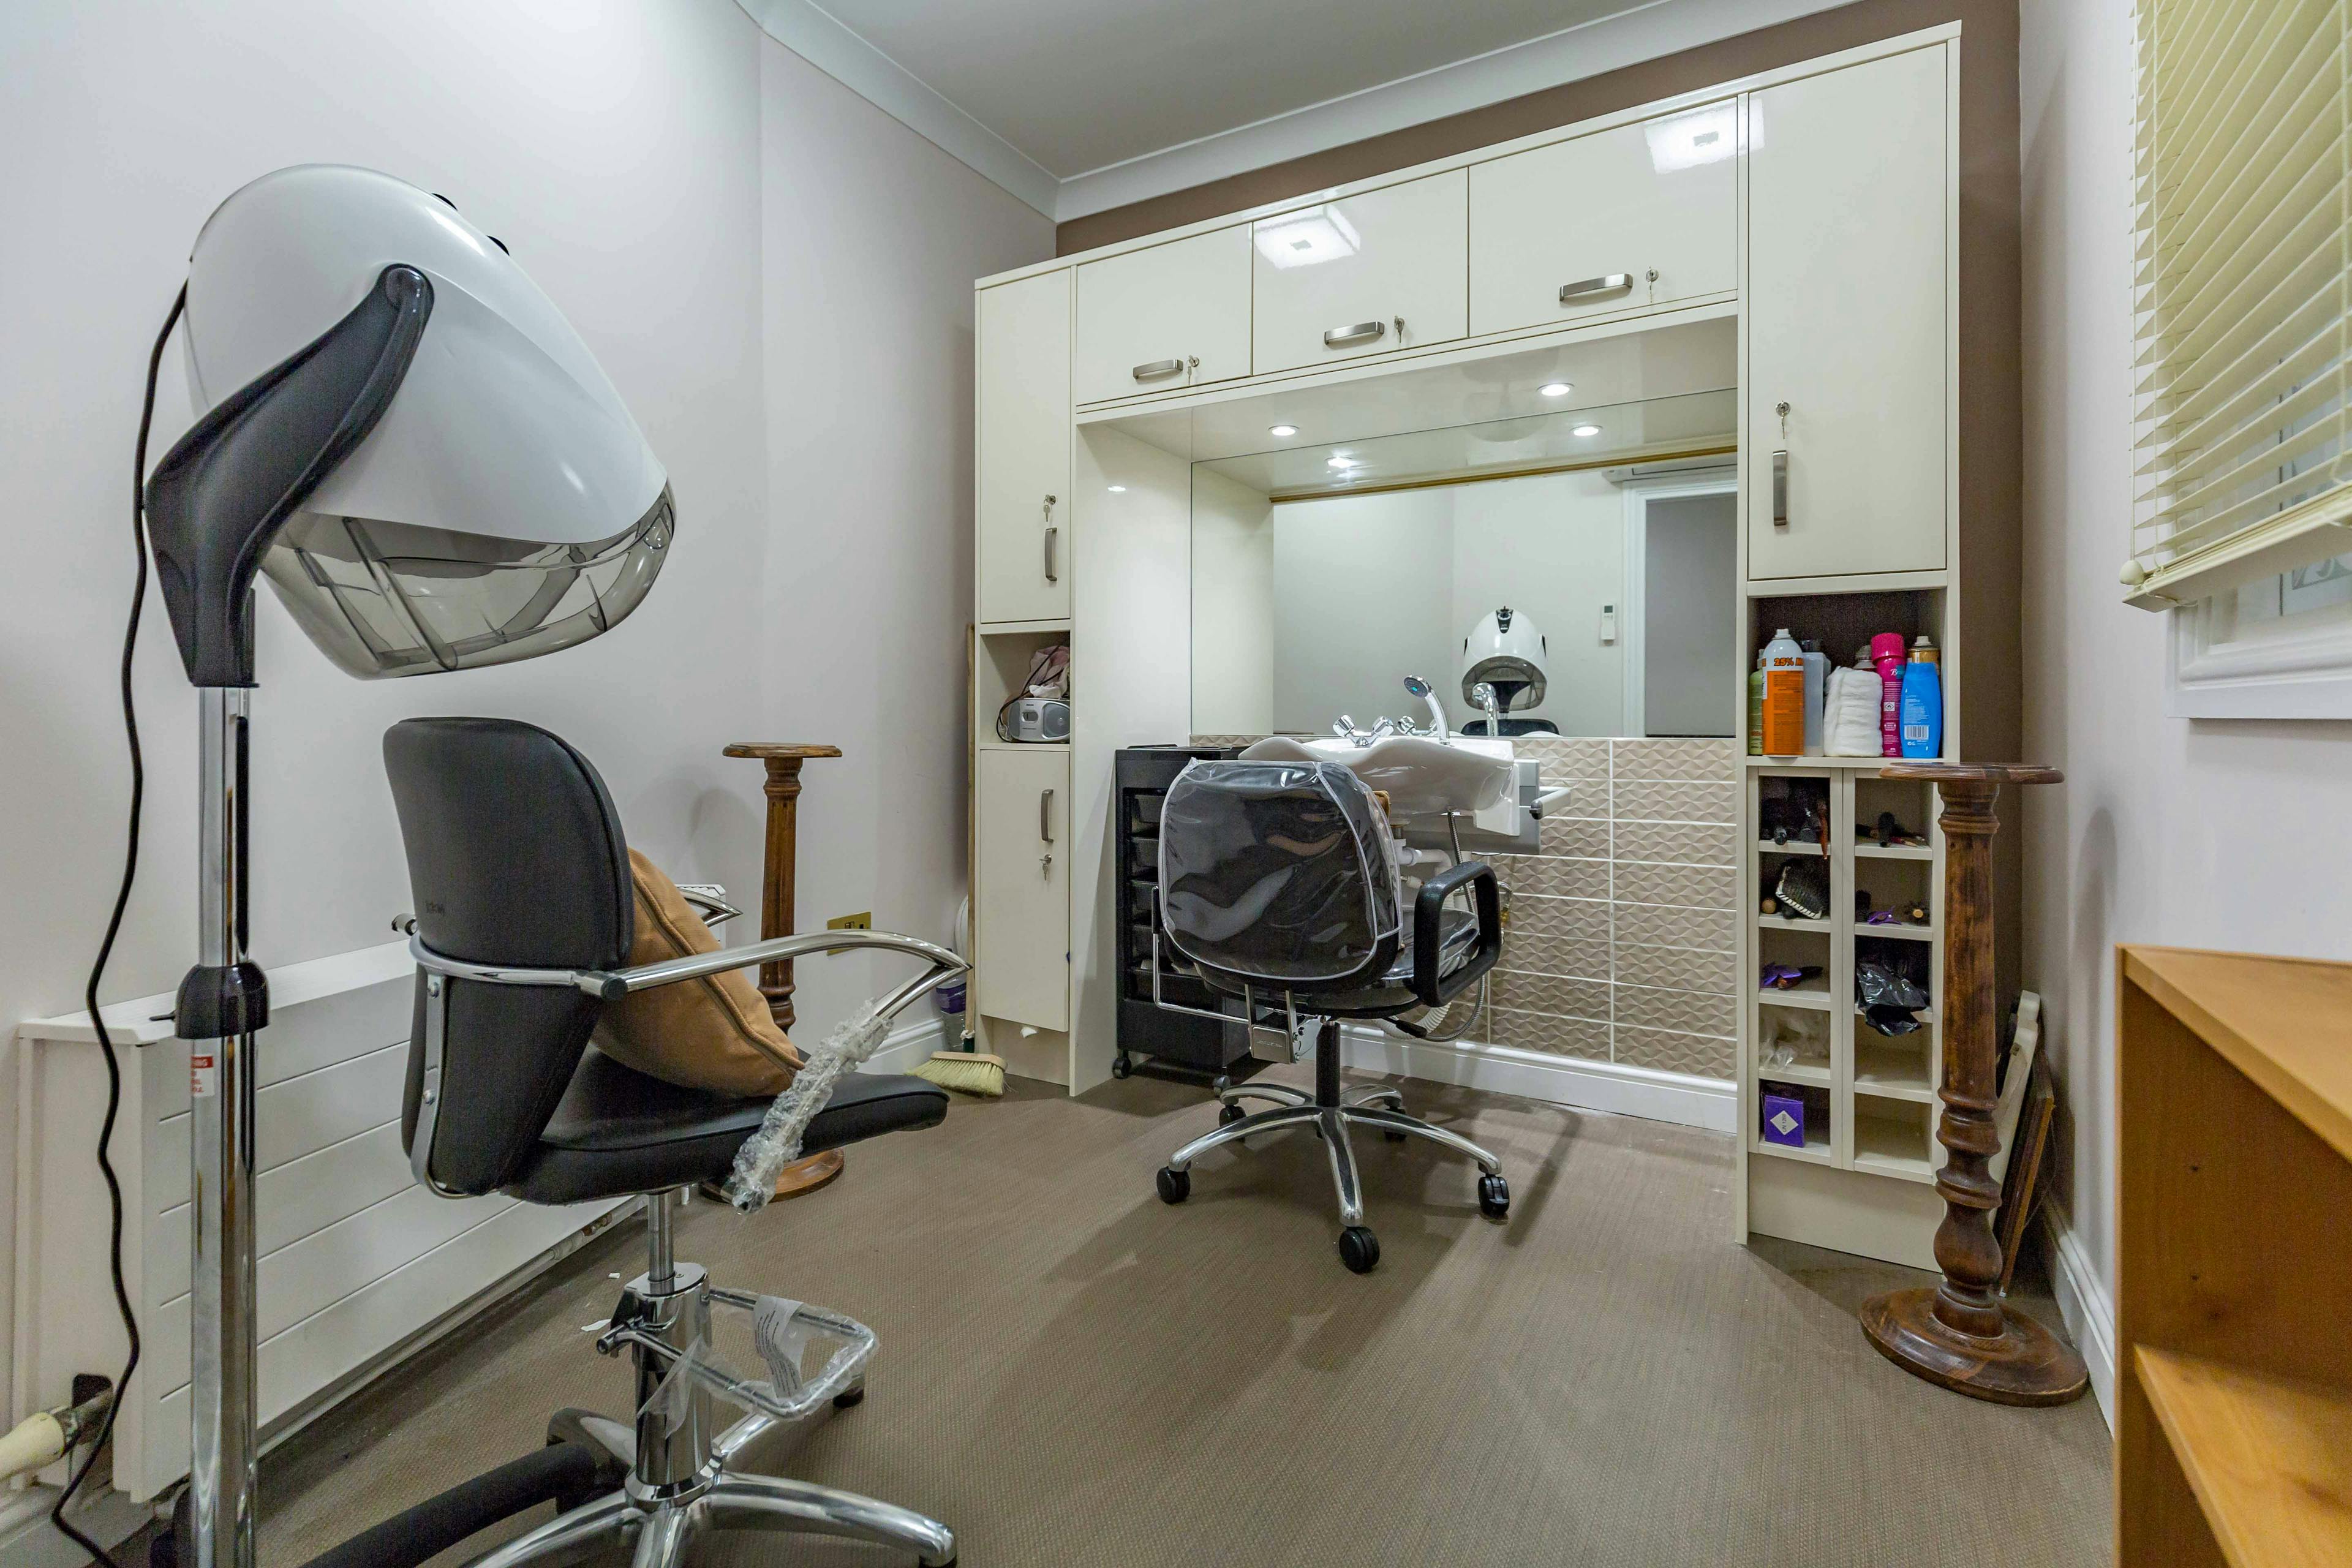 Salon at Southgate Beaumont Care Home in London, England